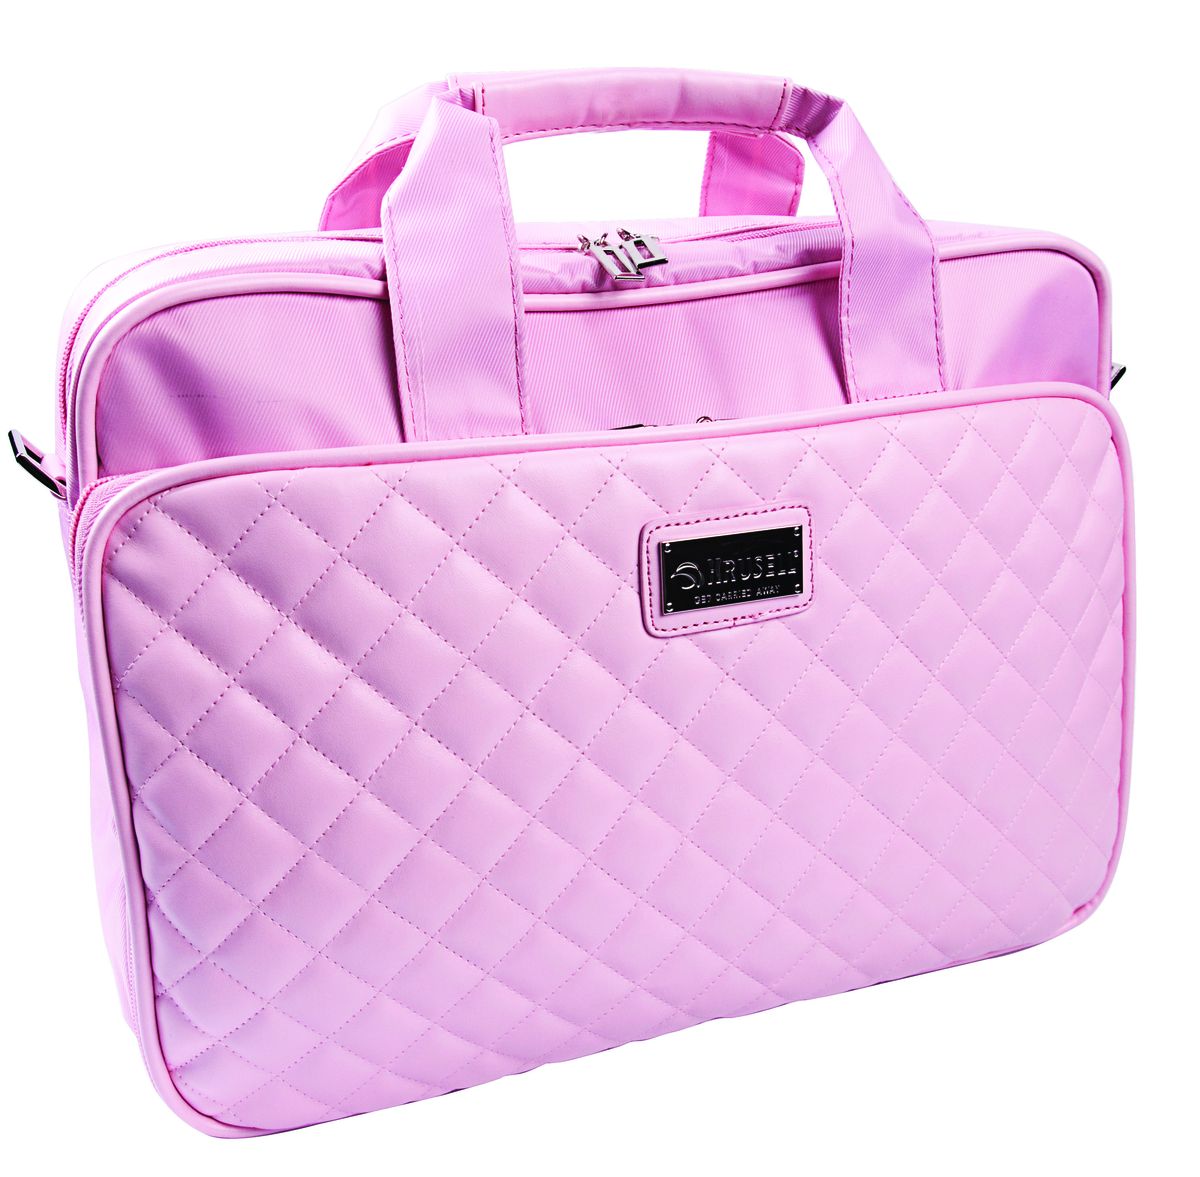 Tuff-luv Krusell Avenyn Laptop Bag Fits 13” – 14” Laptops - Pink | Buy Online in South Africa ...